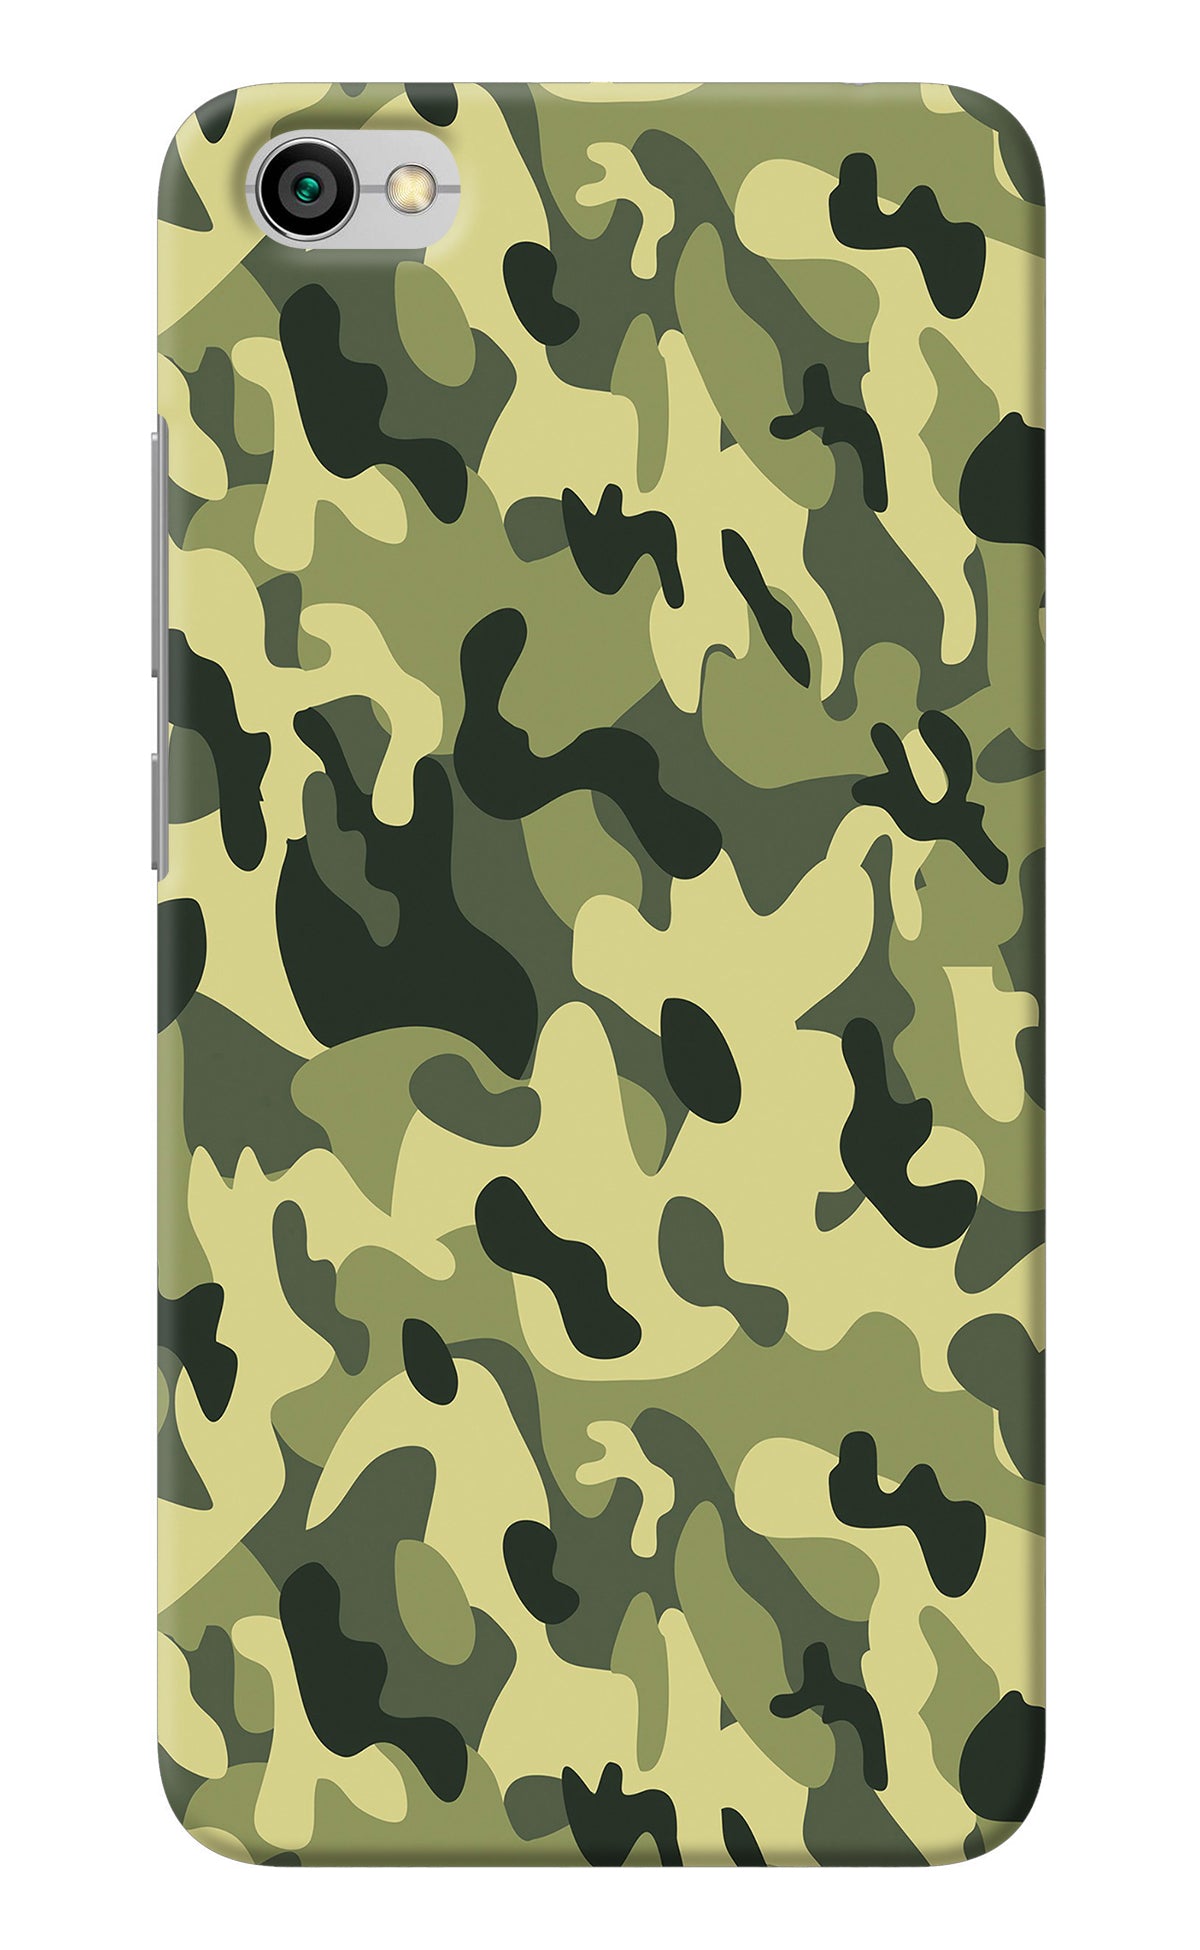 Camouflage Redmi Y1 Lite Back Cover